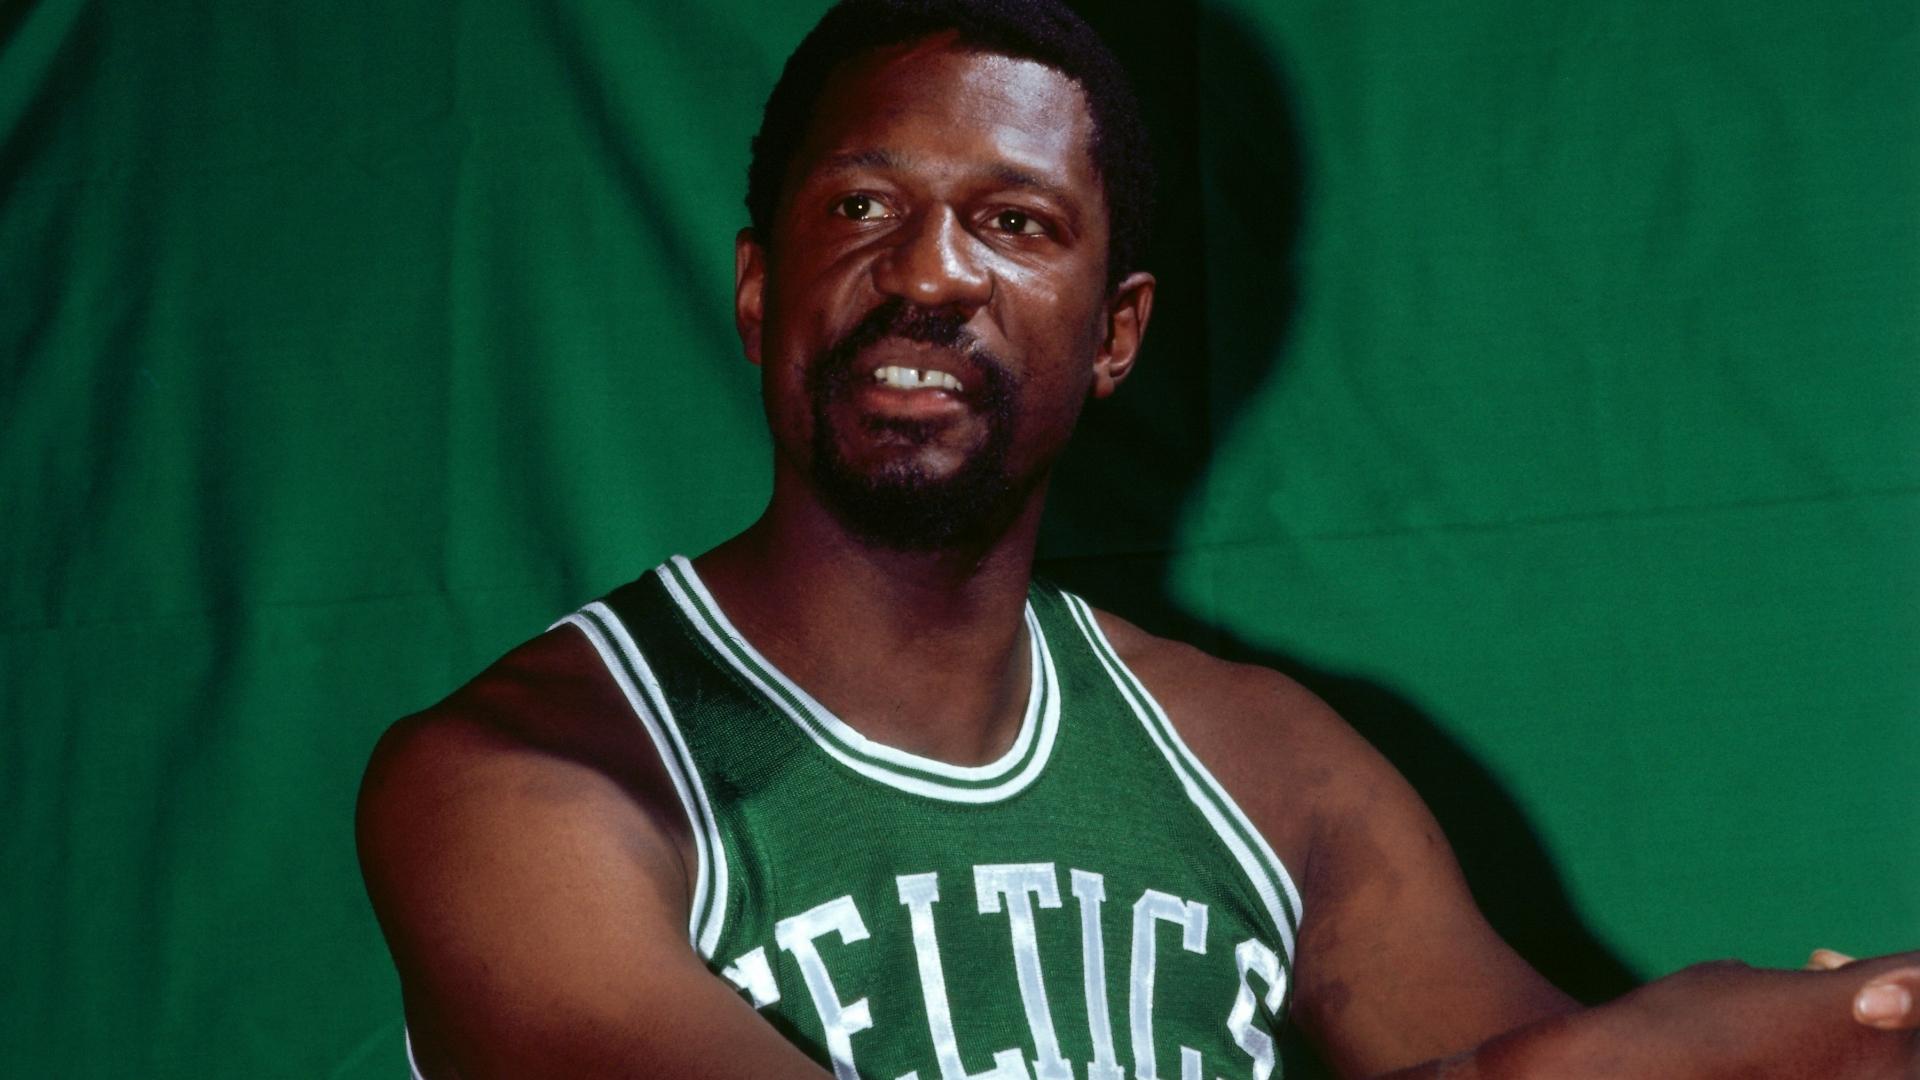 Bill-Russell-Number-Retired